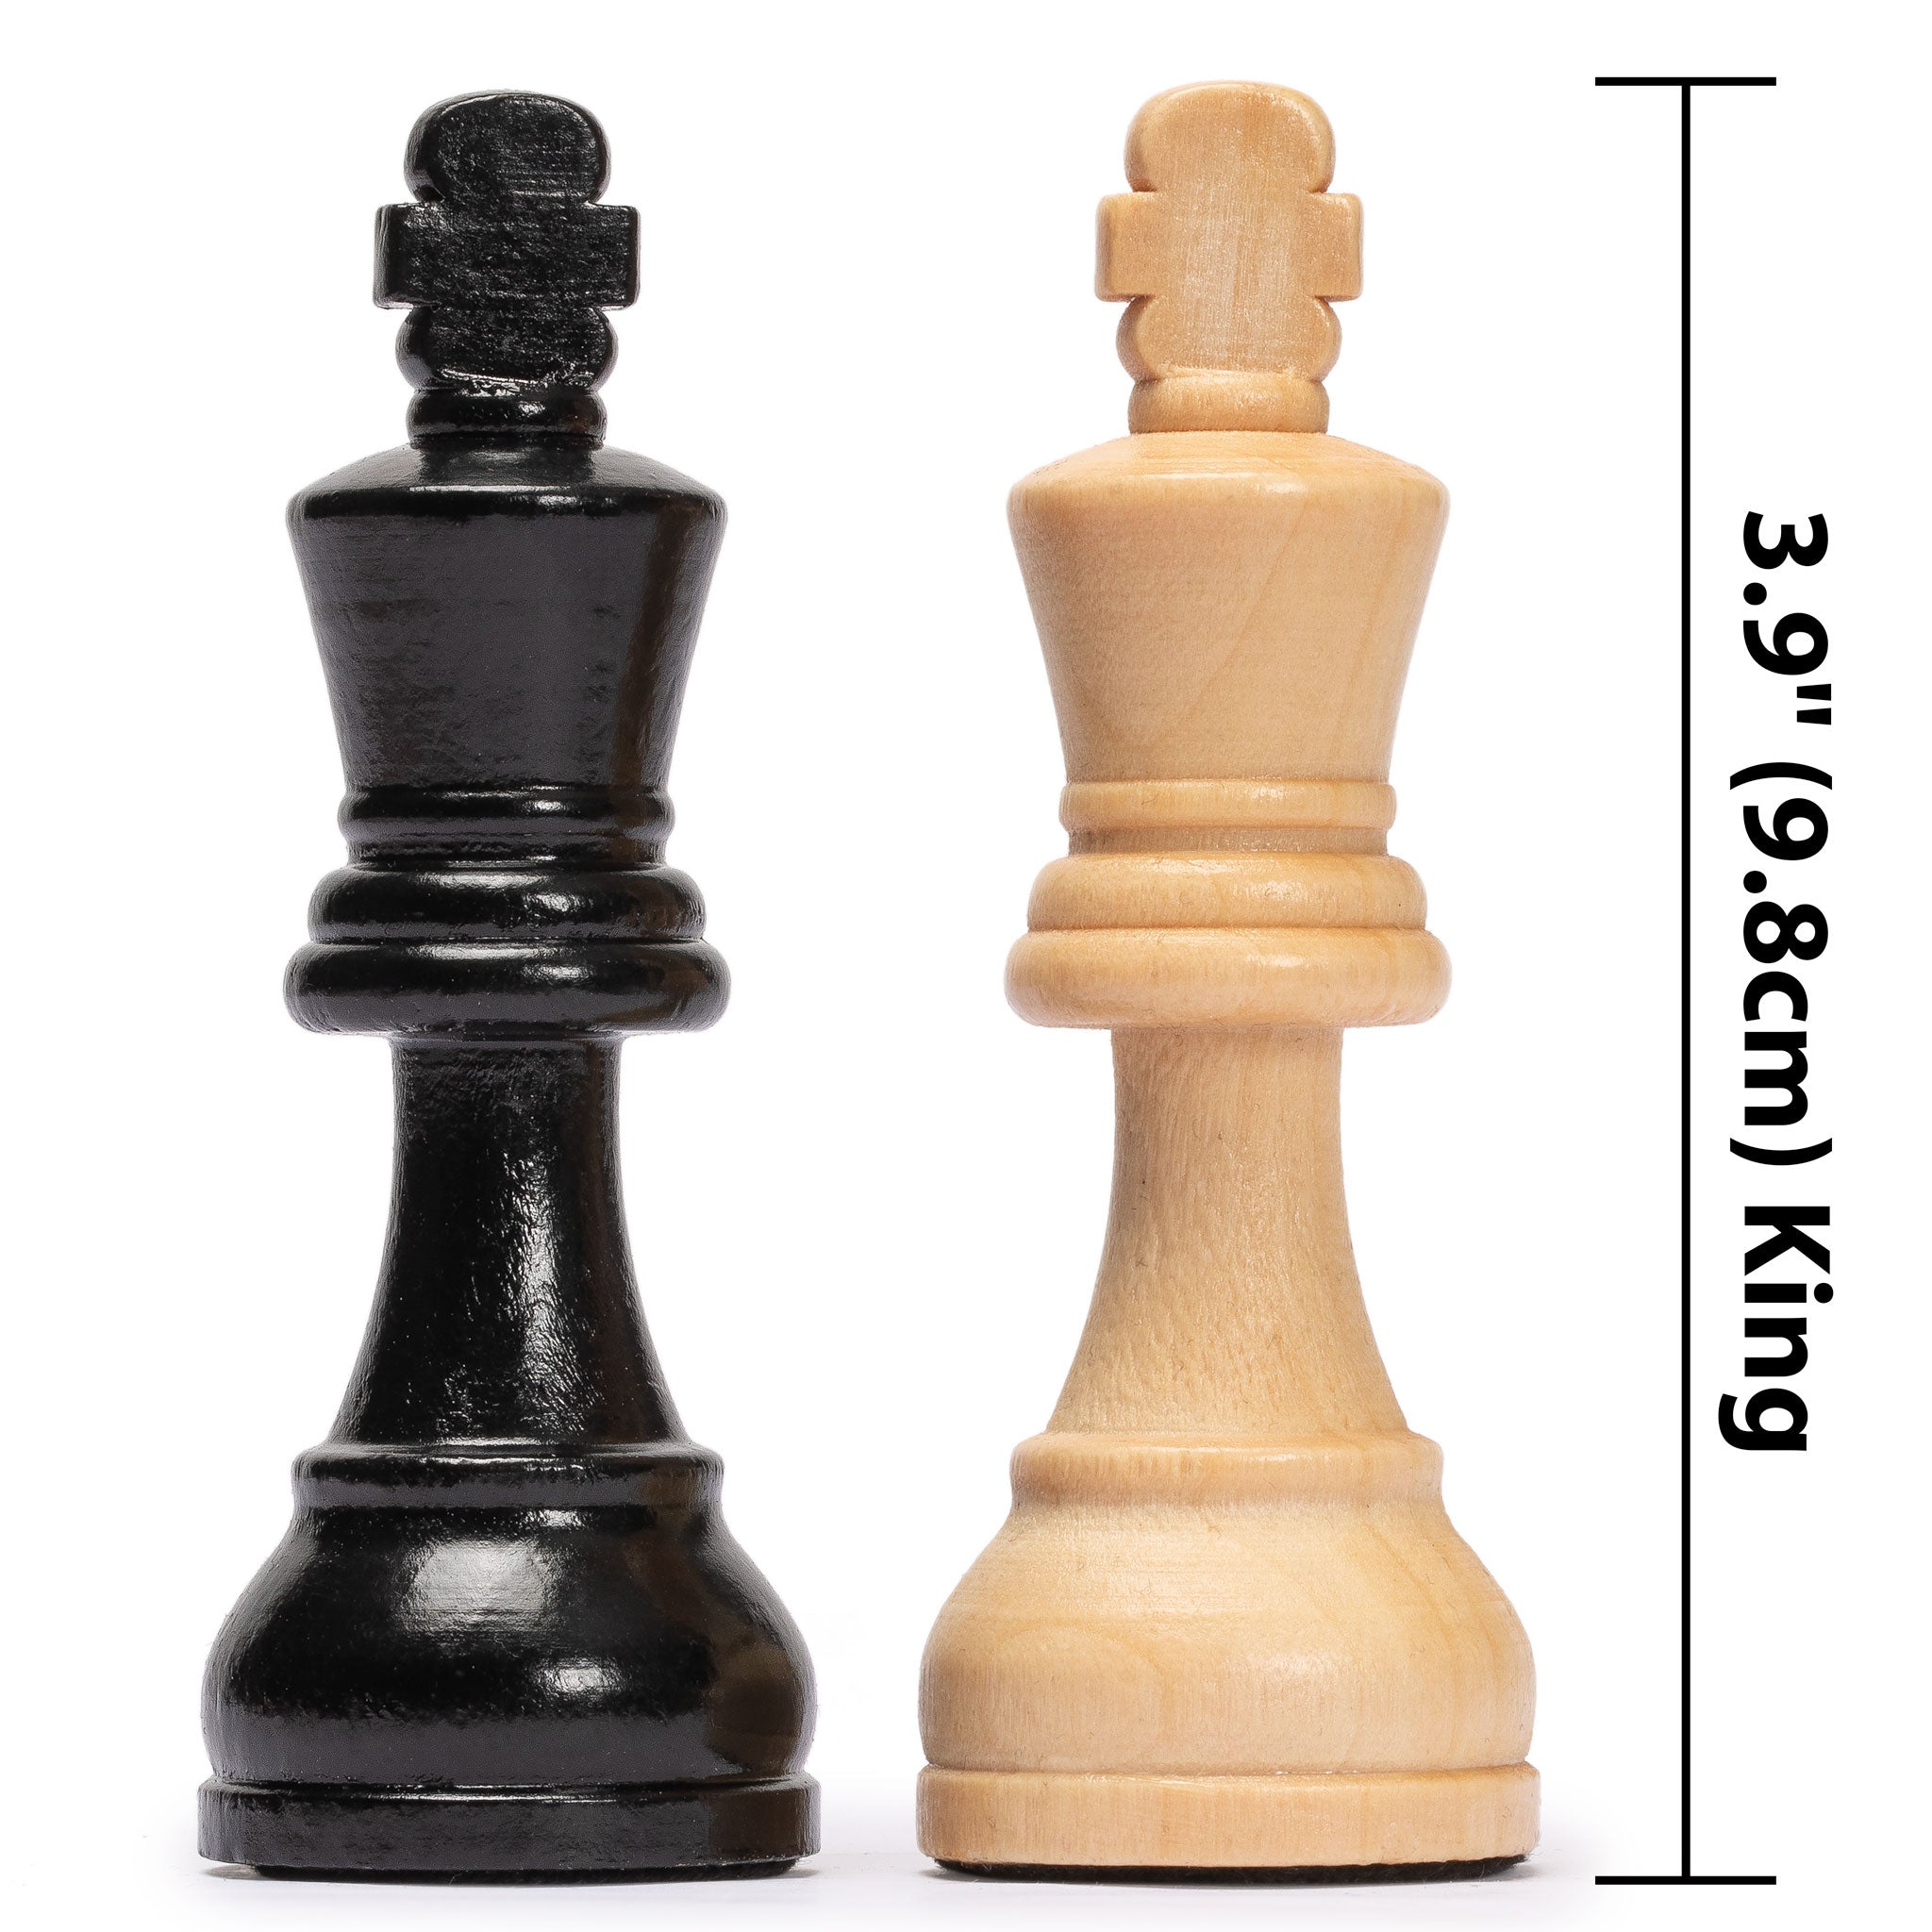 Husaria Staunton Tournament No. 6 Chessmen with 2 Extra Queens and Wooden Box, 3.8" Kings-Husaria